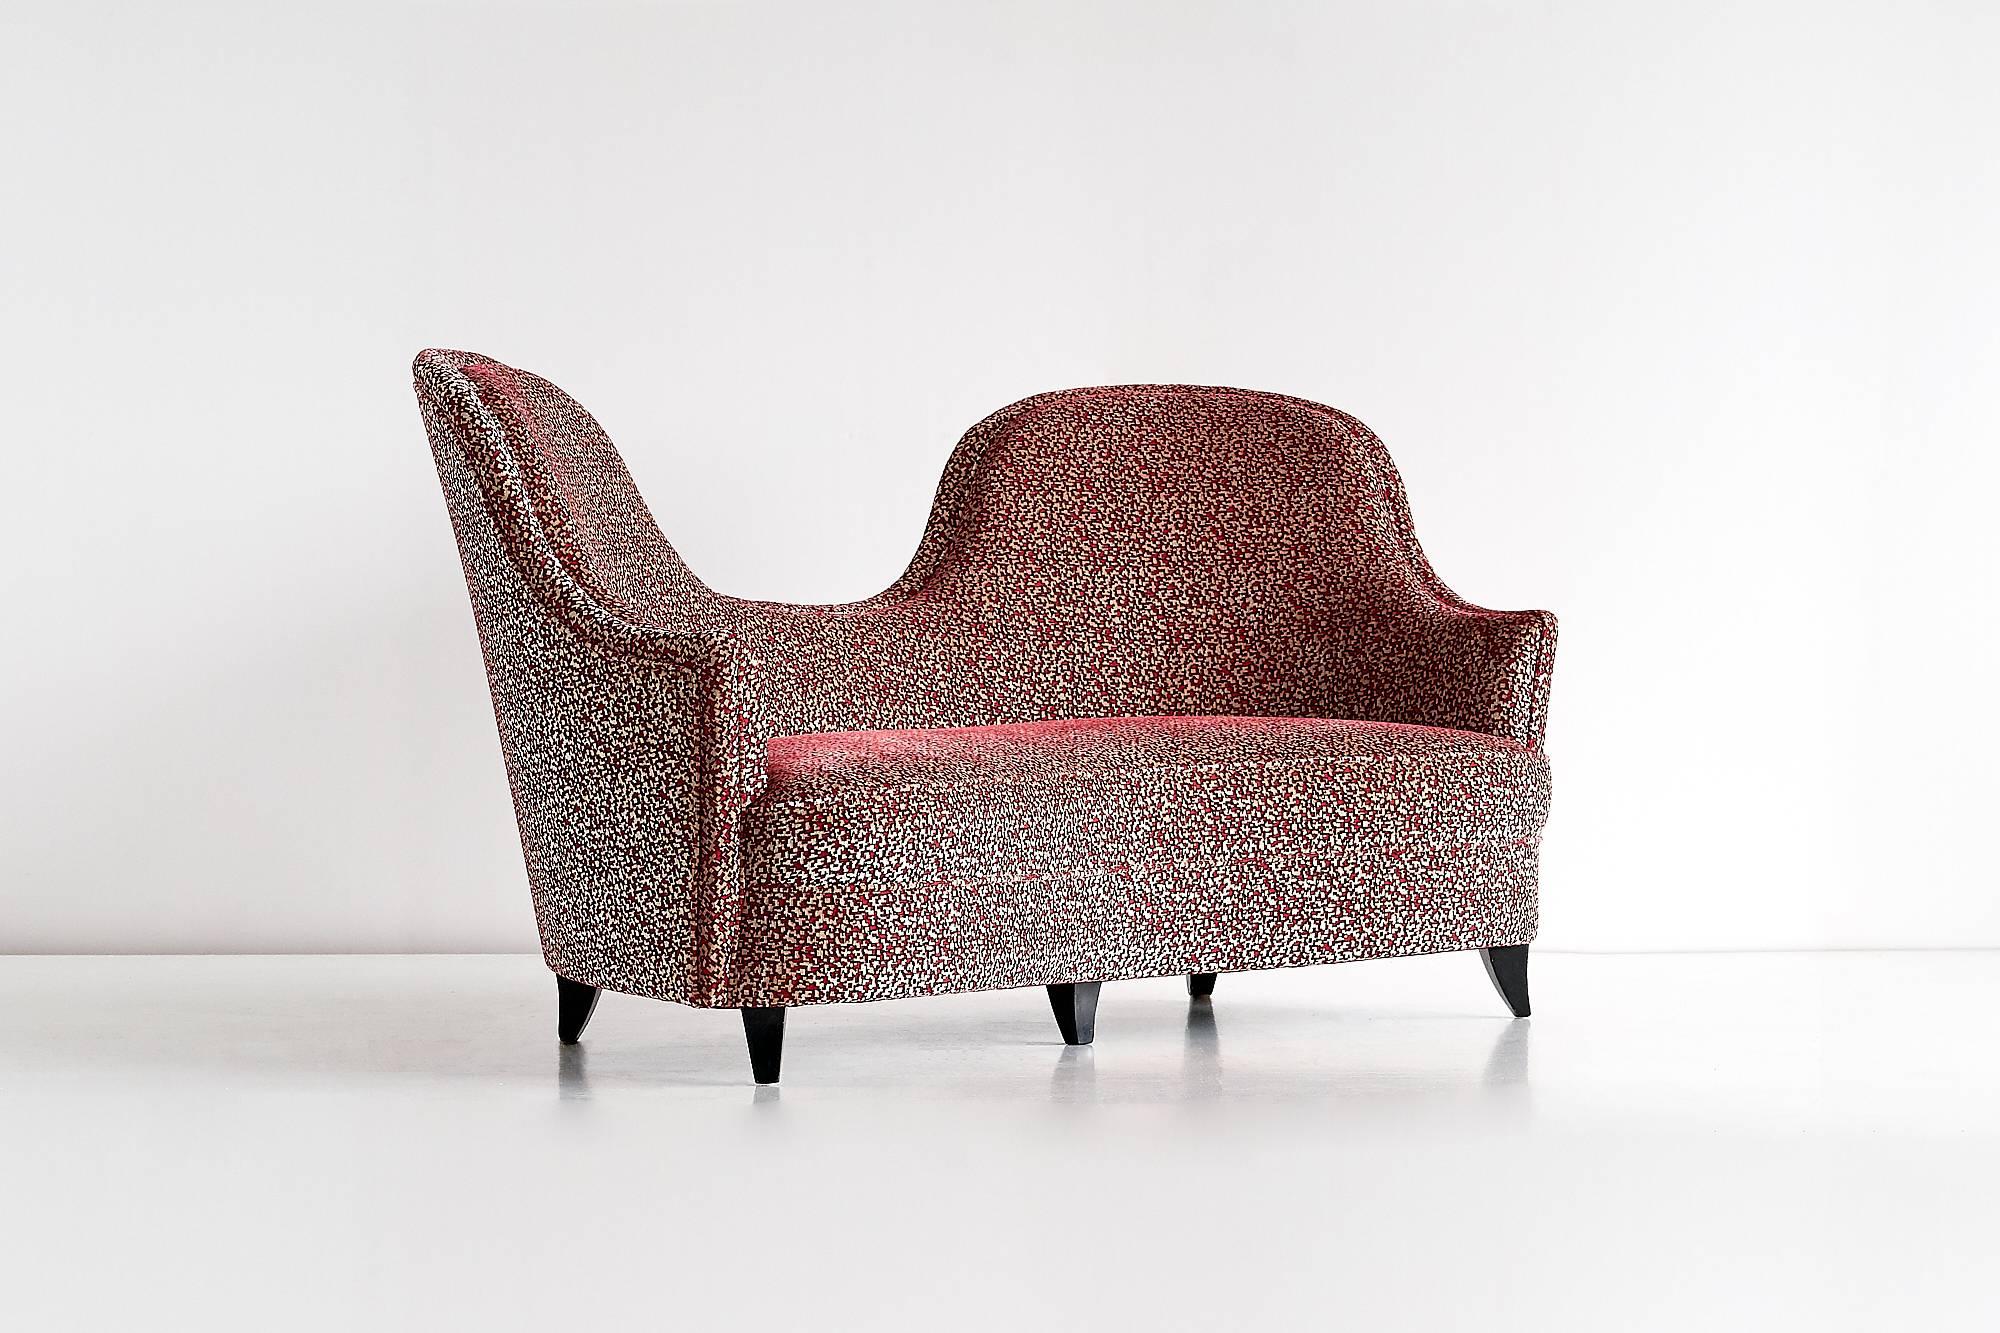 This bijou two-seat sofa was designed by Maurizio Tempestini, circa 1940 and produced by Mario Tamberli in Florence. The sofa was a custom design for the Casa Innocenti Settepassi, the private residence of the Settepassi's, an established family of